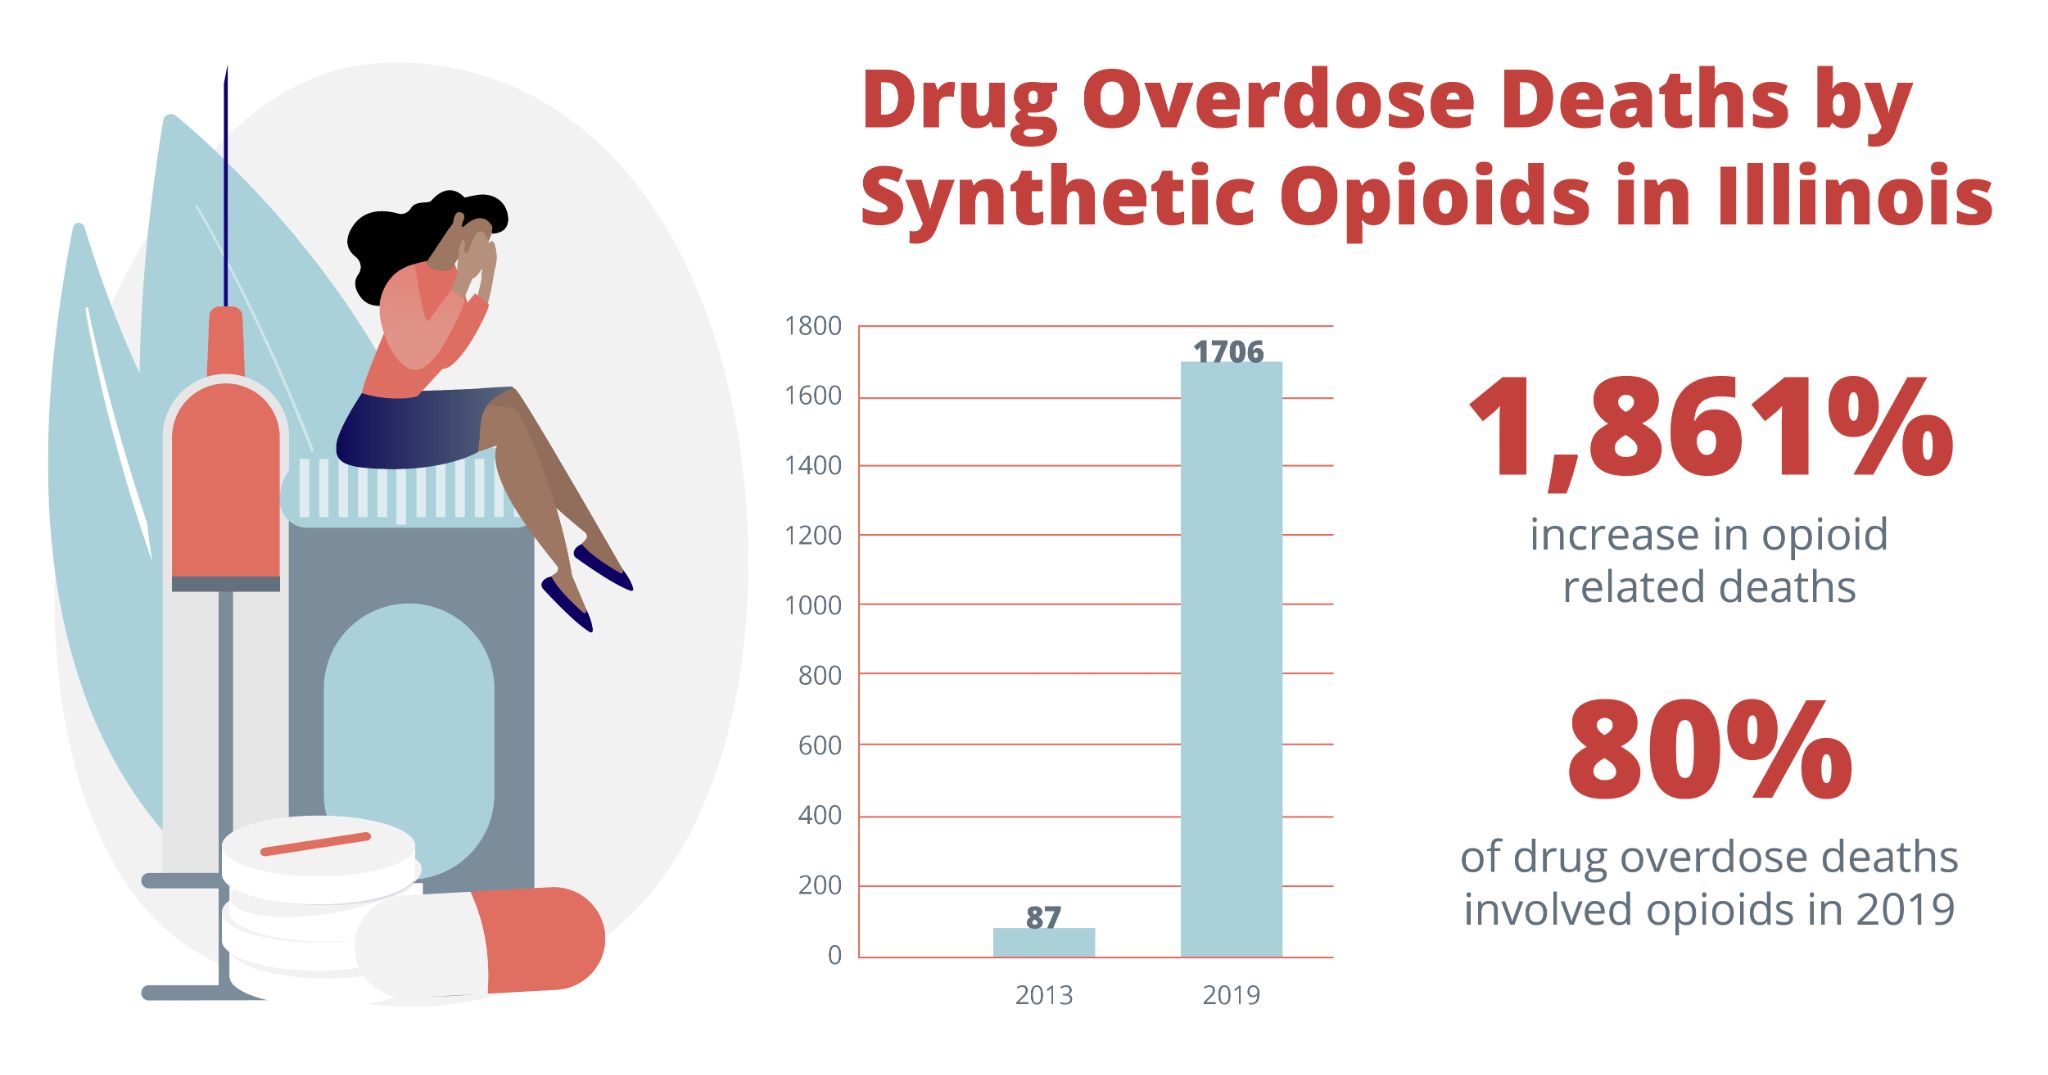 Drug overdose deaths by synthetic opioids in illinois. 1,861% increase in opioid related deaths. 80% of drug overdose deaths involved opioids in 2019. Drug And Alcohol Detox & Rehab, Addiction Treatment Resources in Carbondale Illinois